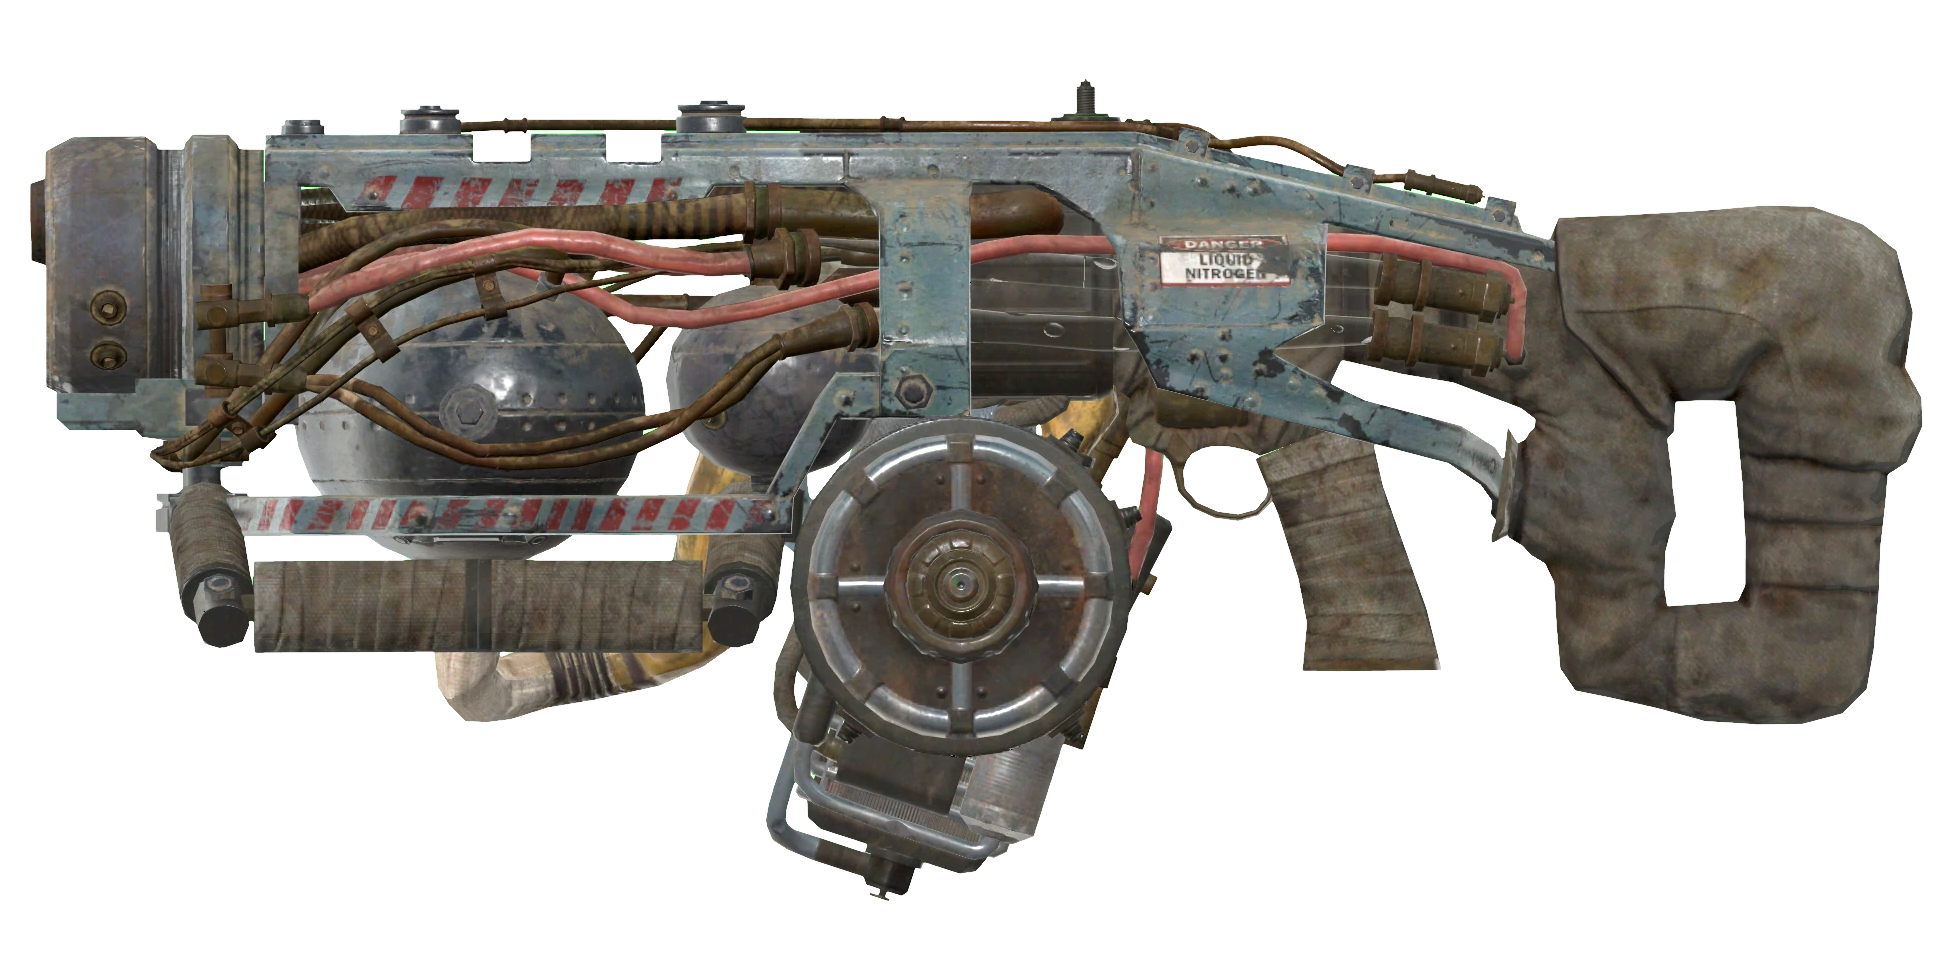 Fallout 76 weapons in fallout 4 фото 12